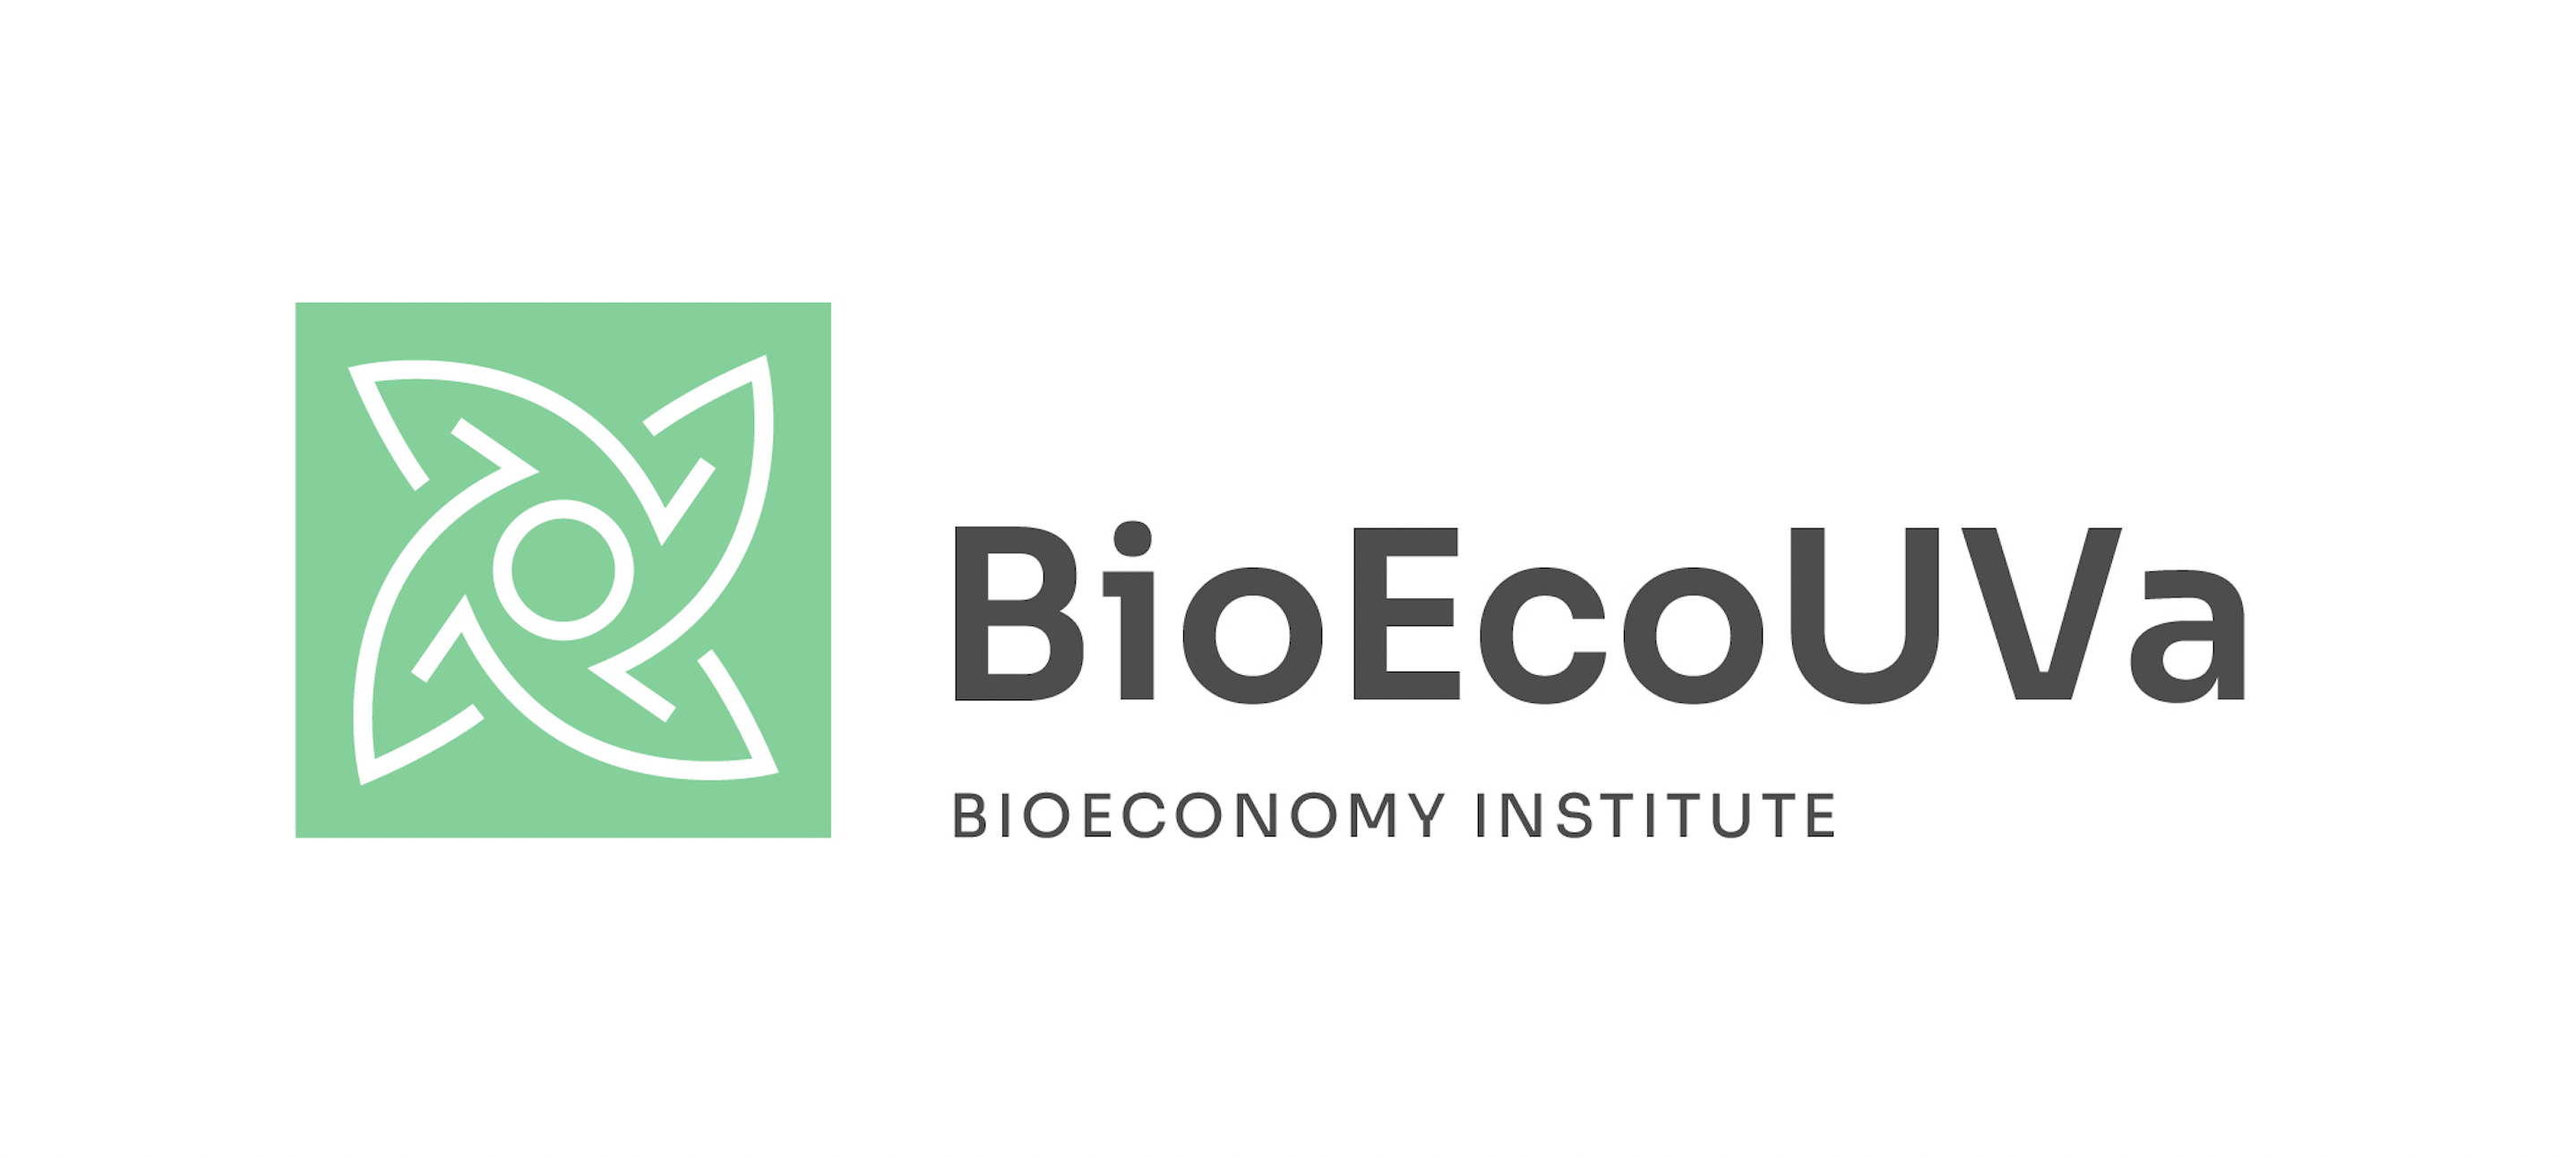 Support for the internationalization of the BioEcoUVa research institute.